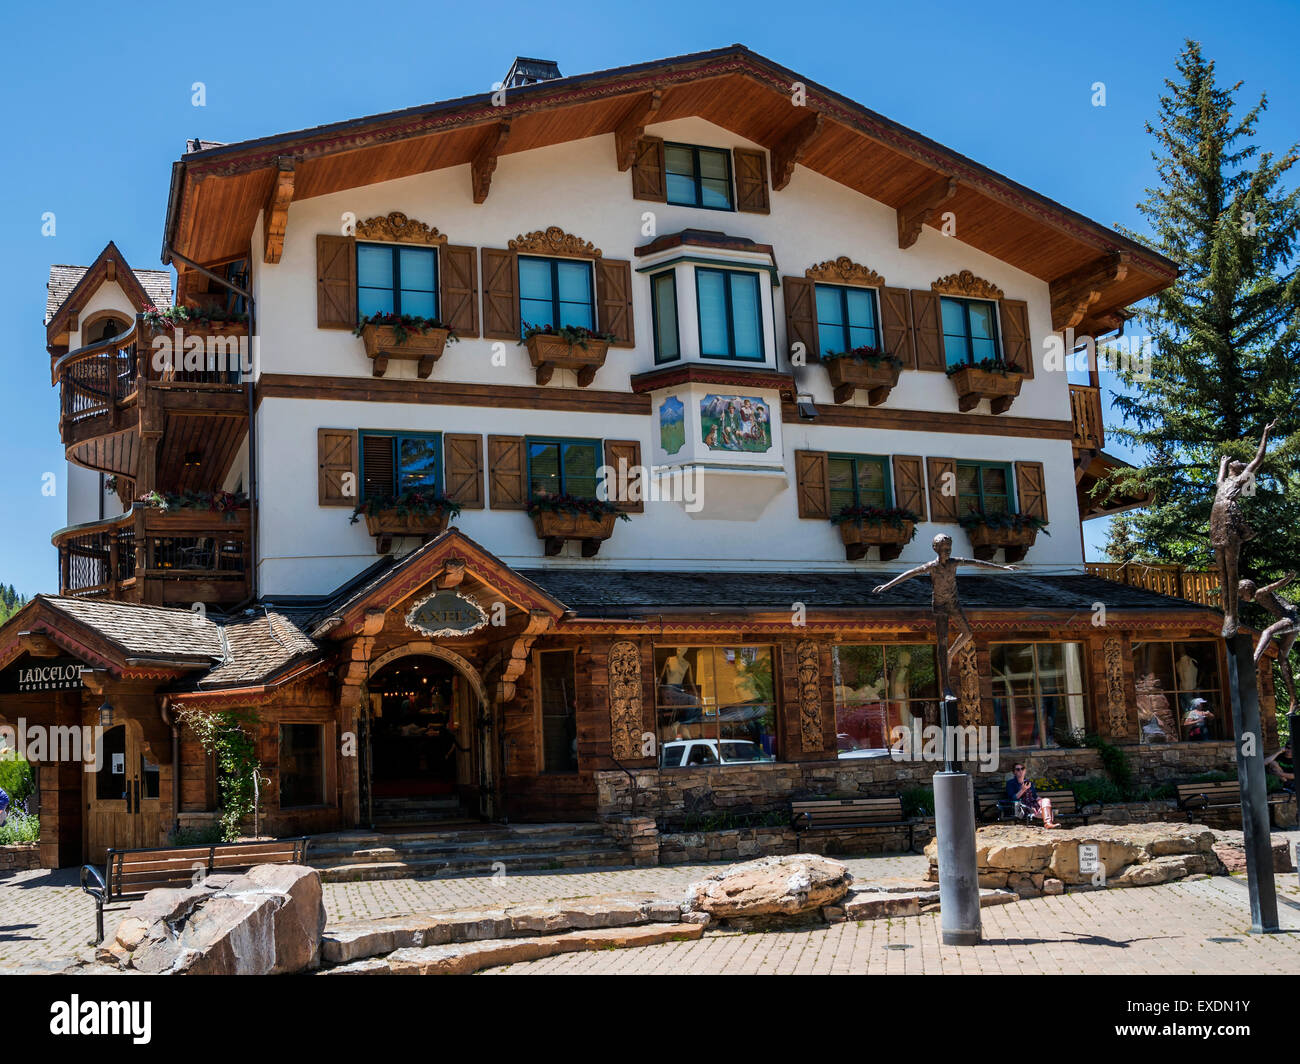 Building in Bavarian style, The Town of Vail , Colorado, USA, North America, United States Stock Photo